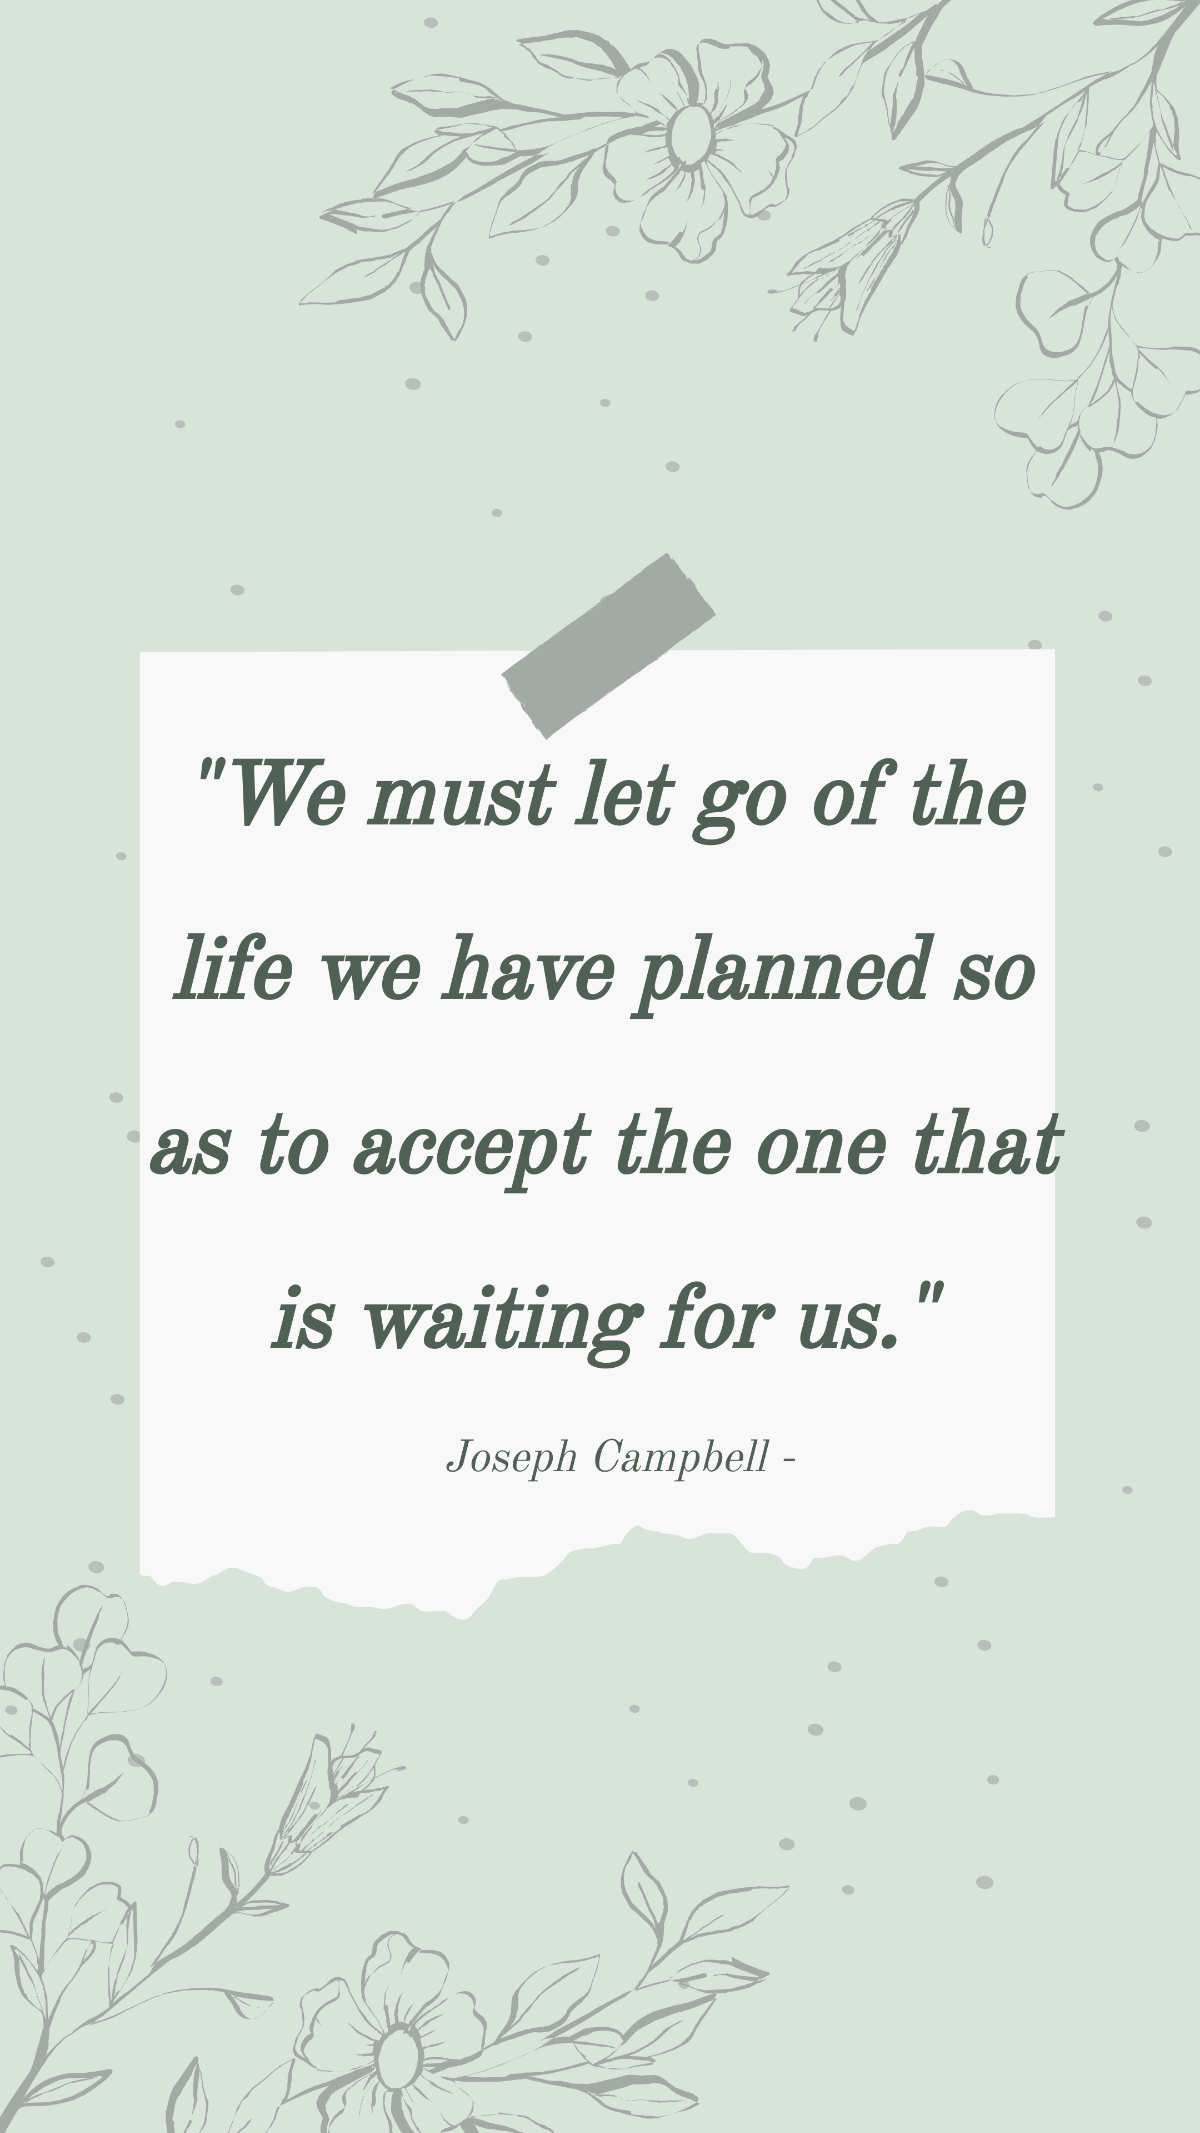 Joseph Campbell - We must let go of the life we have planned so as to accept the one that is waiting for us. Template